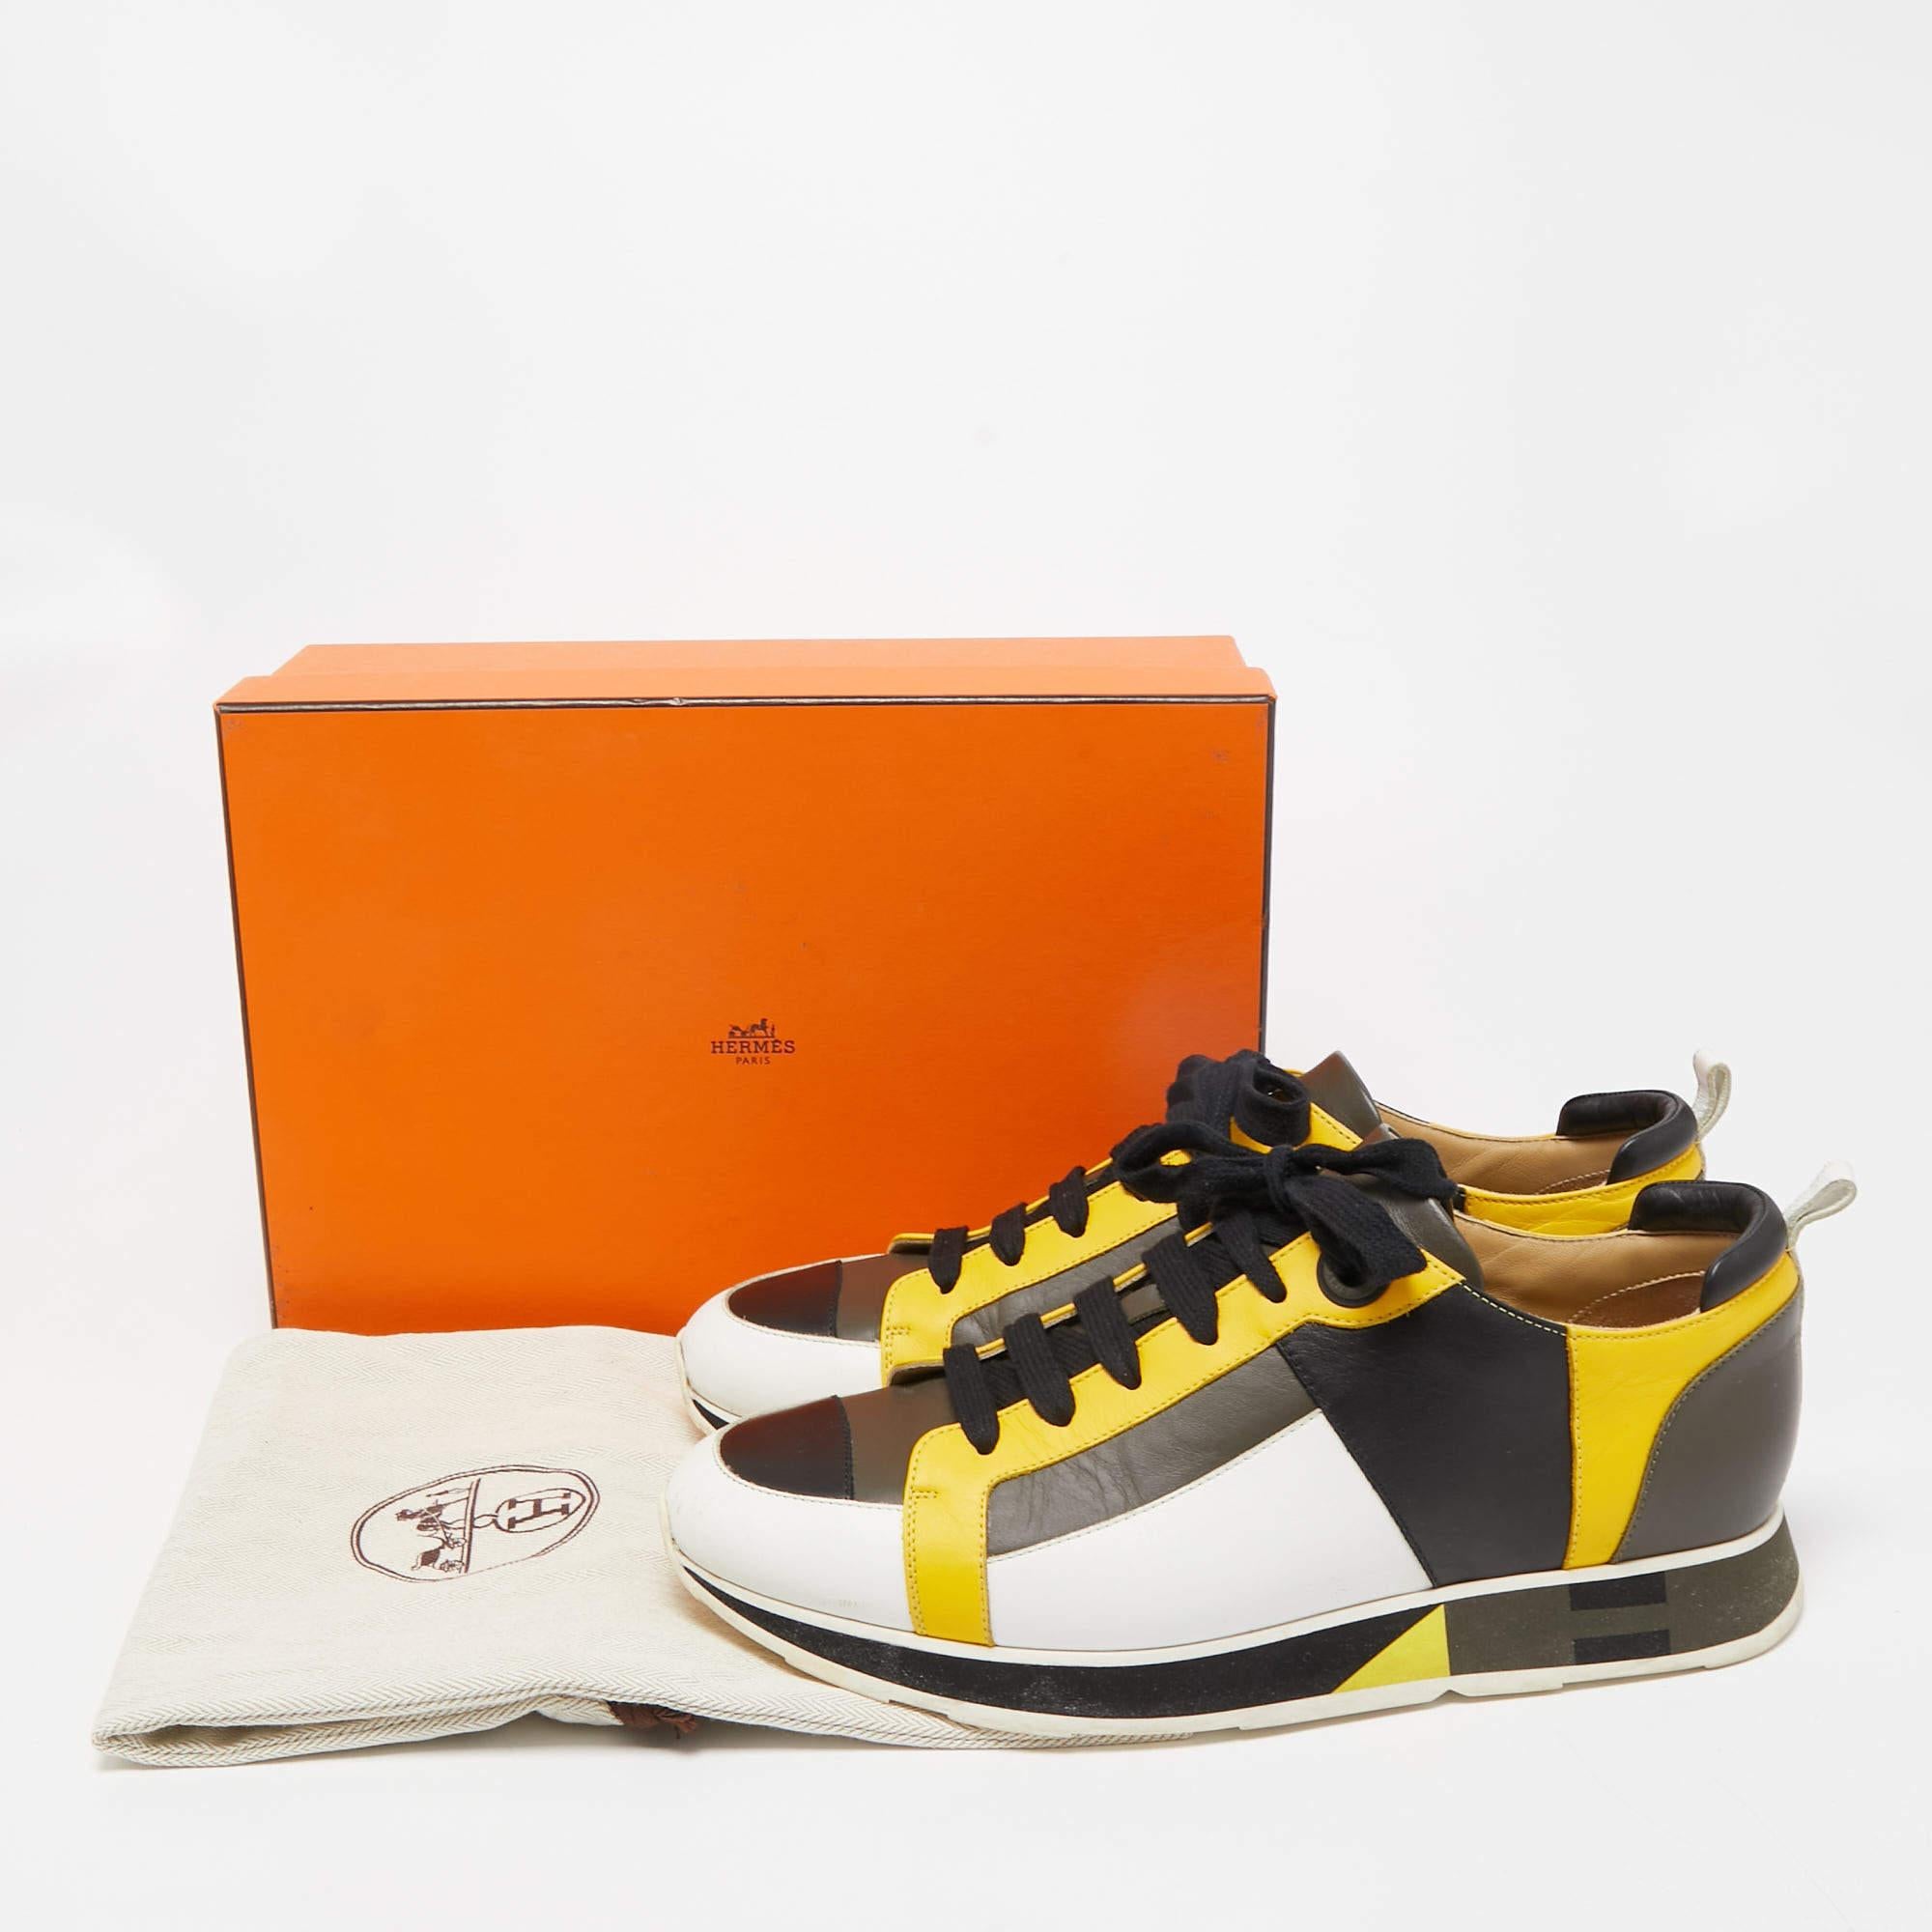 Hermes Multicolor Leather Rebus Sneakers Size 42 4